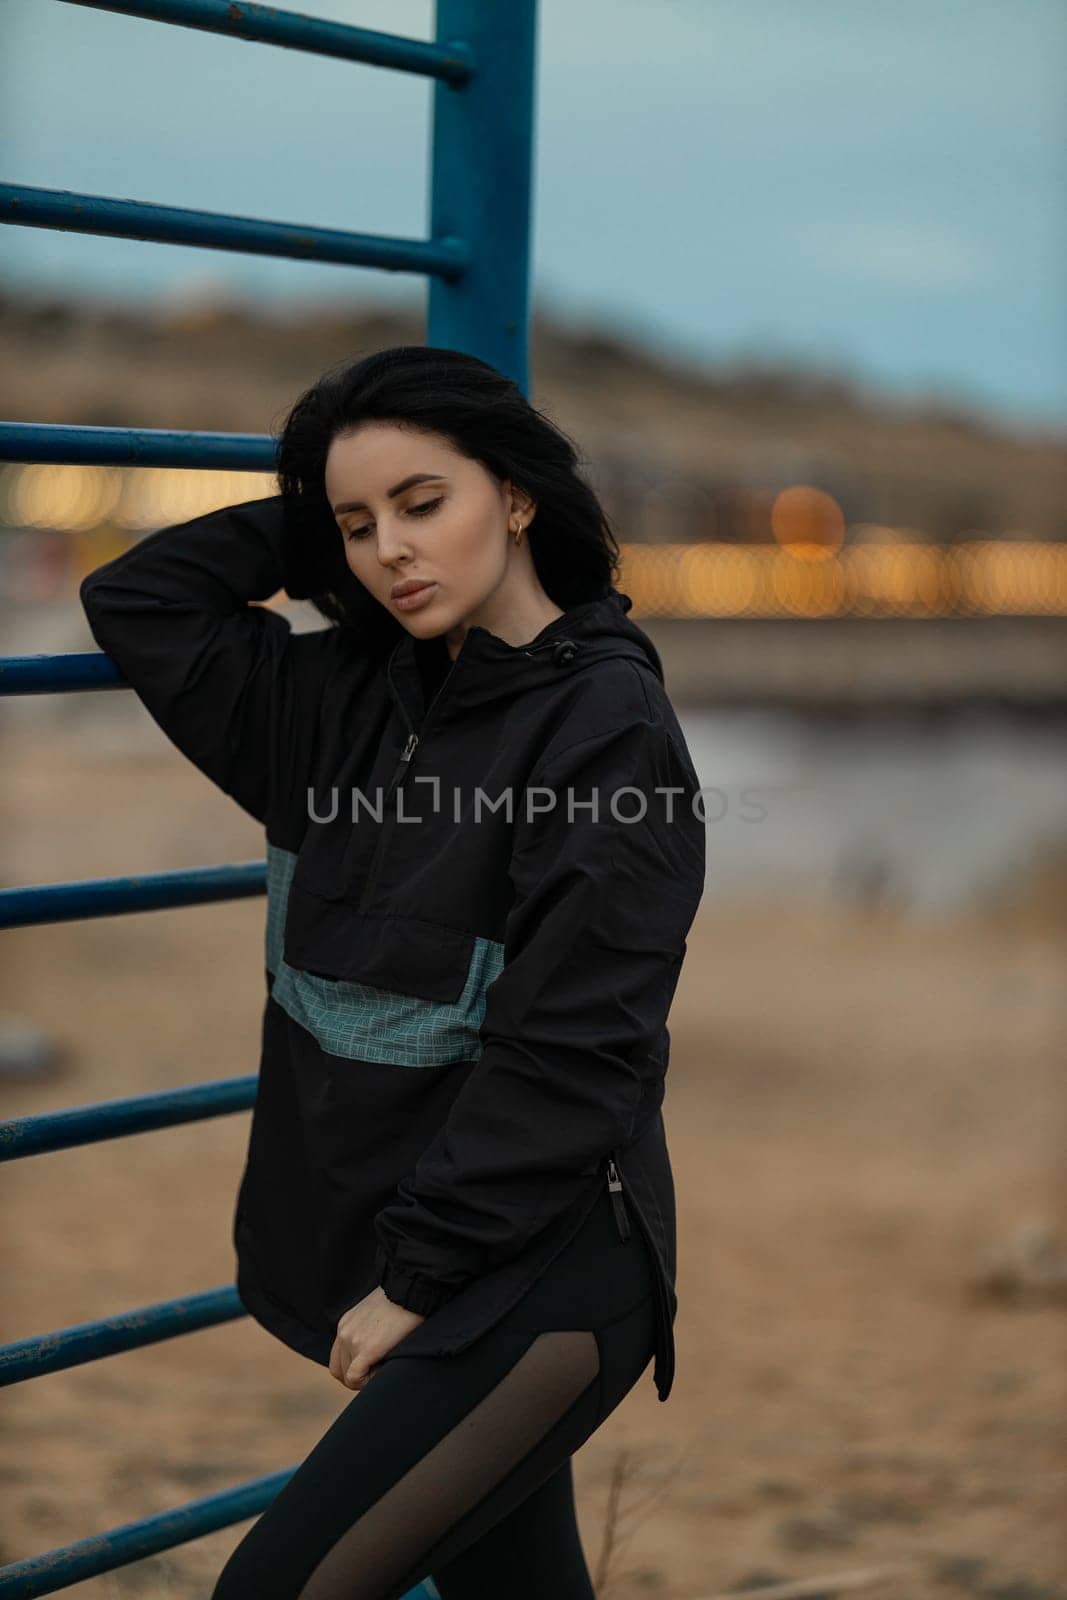 A beautiful brunette fitness model is working out on a sports ground by the sea. Young woman posing in an anorak and leggings outdoors. Fashionable sportswear for street training